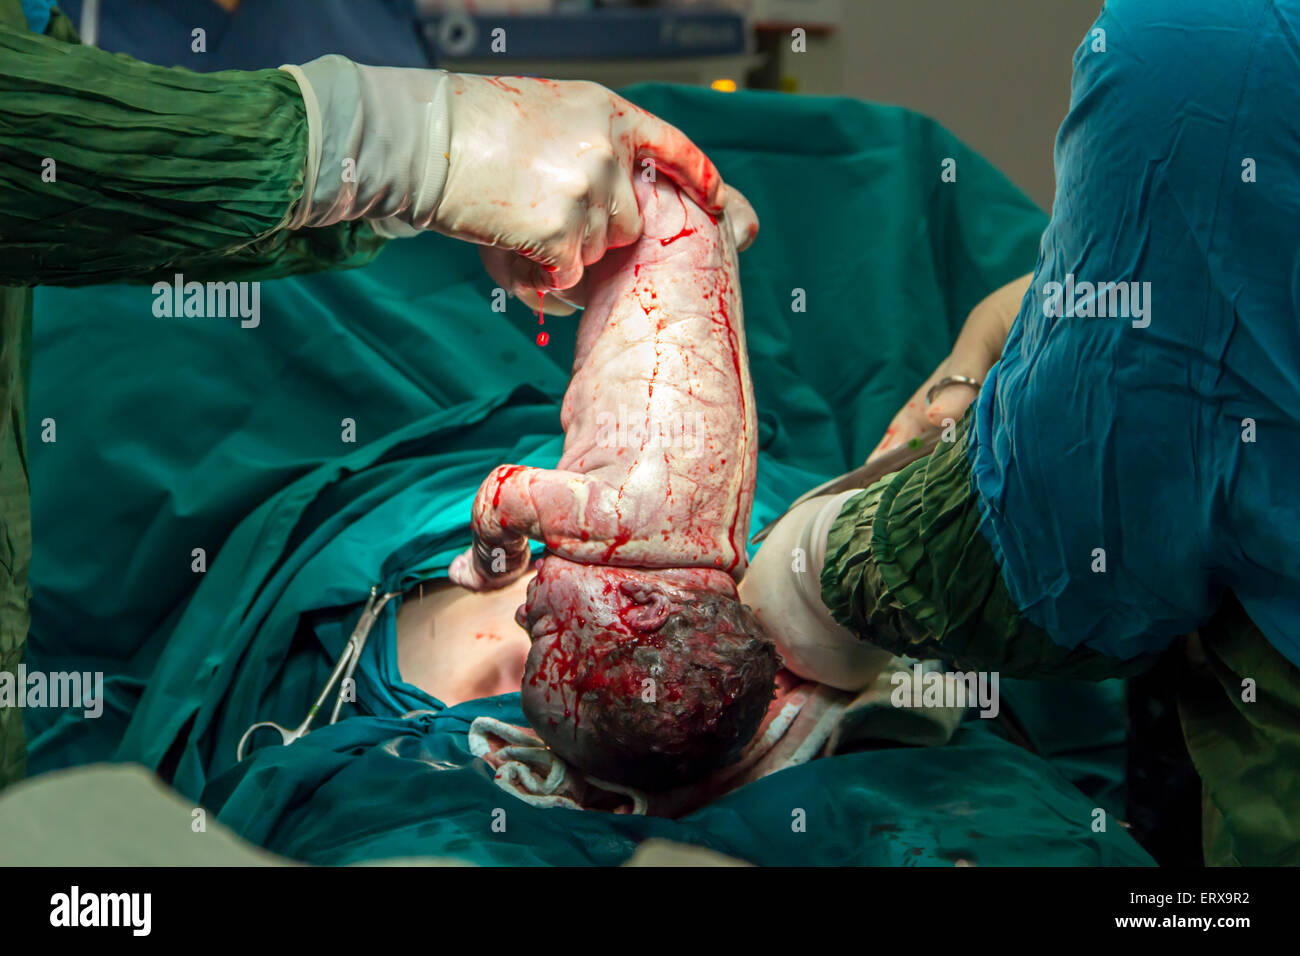 childbirth in operation room c-section surgery Stock Photo